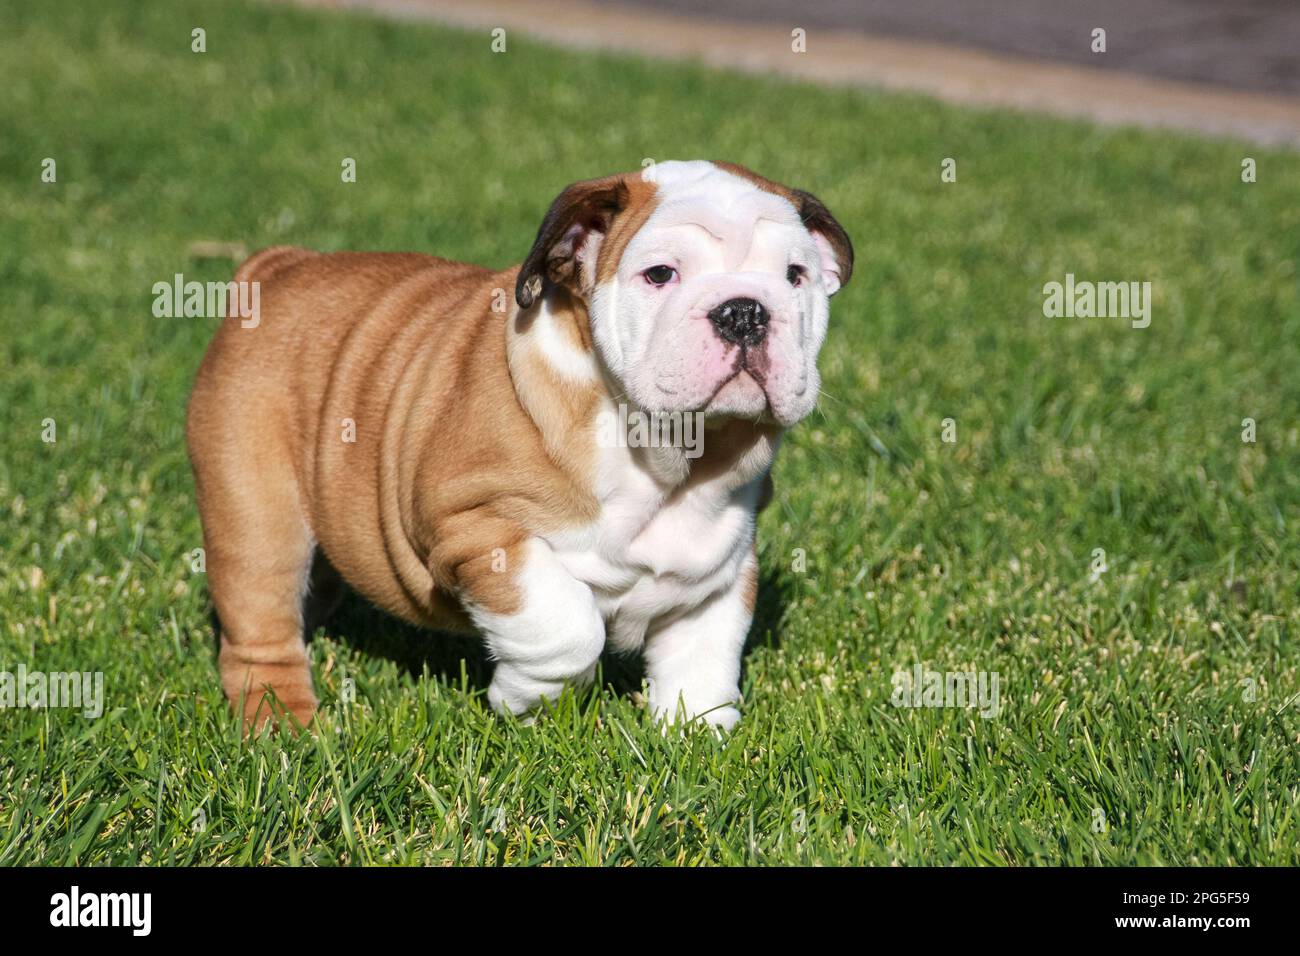 Red and white bulldog puppy playing in the grass Stock Photo